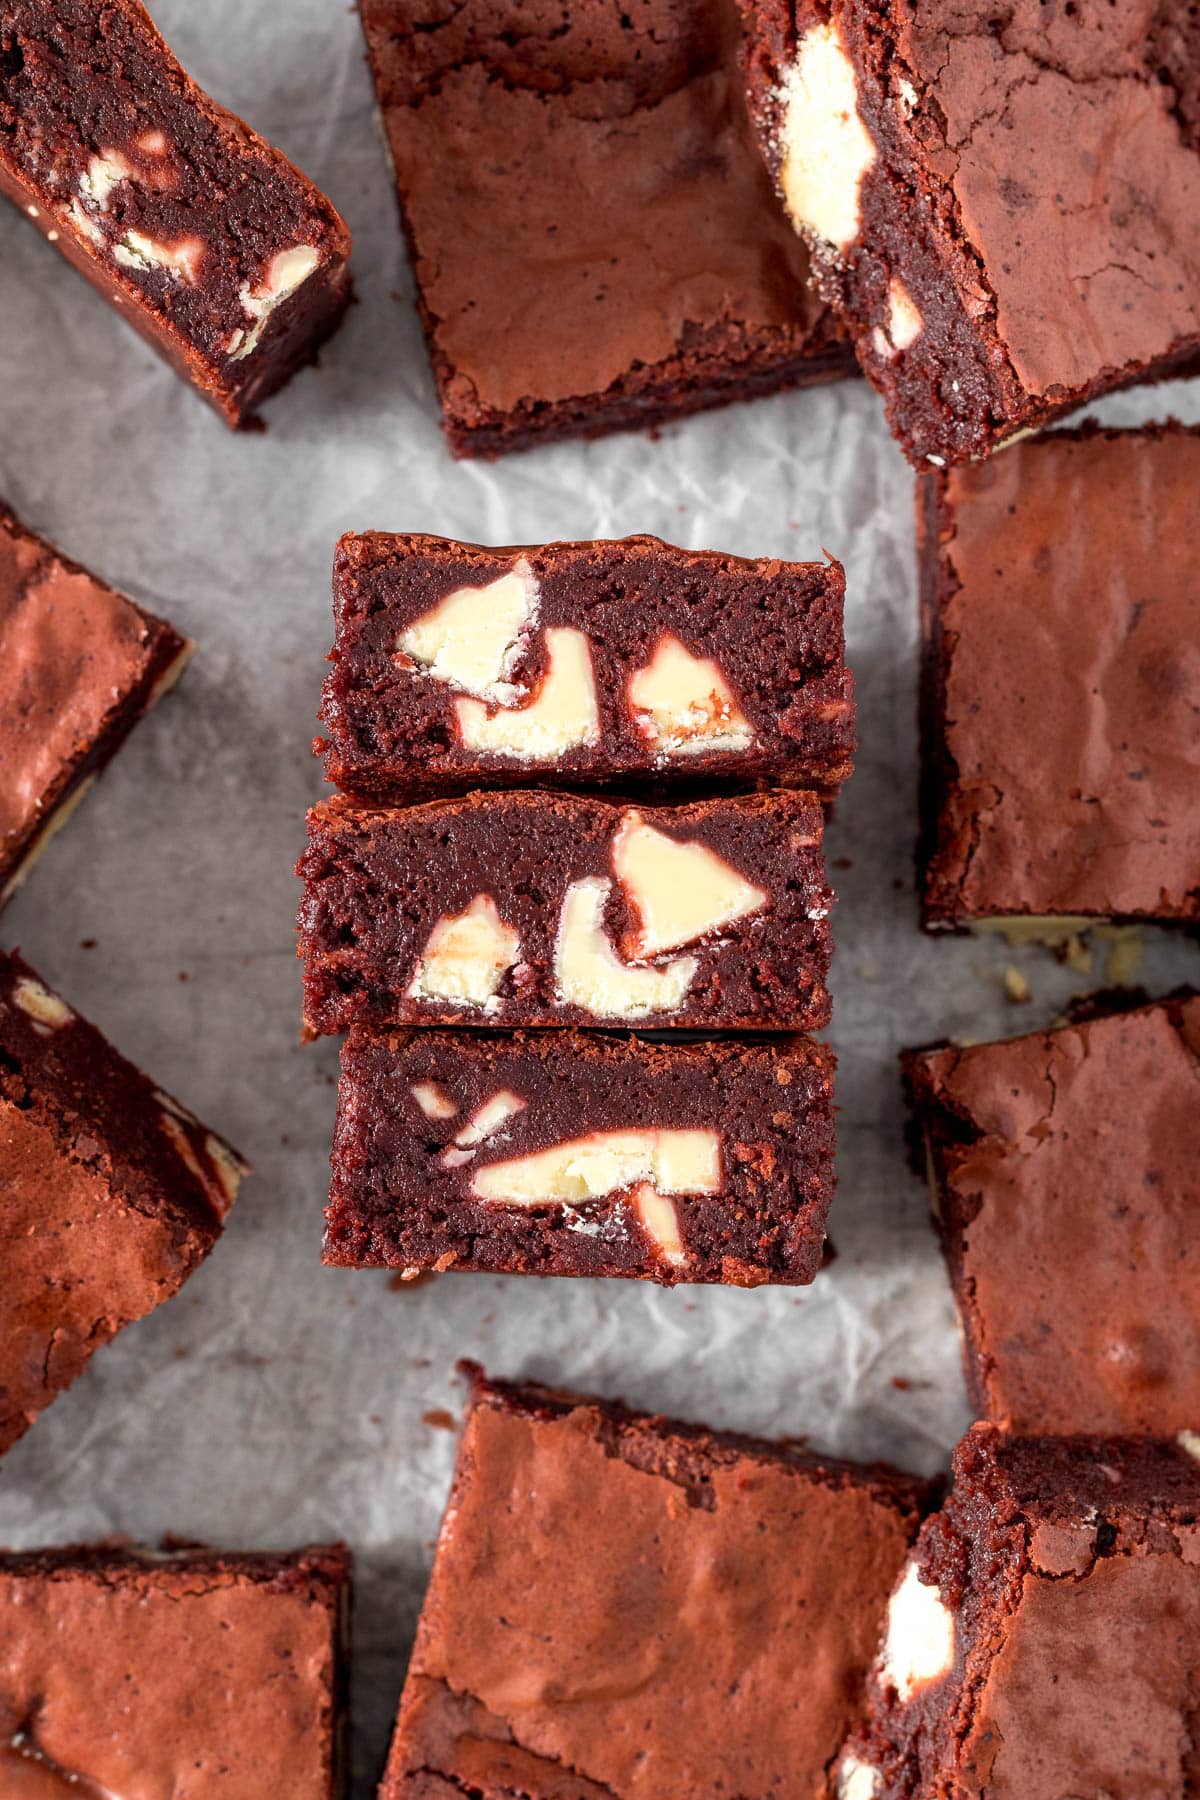 Three red velvet brownies on their sides showing white chocolate chunks.